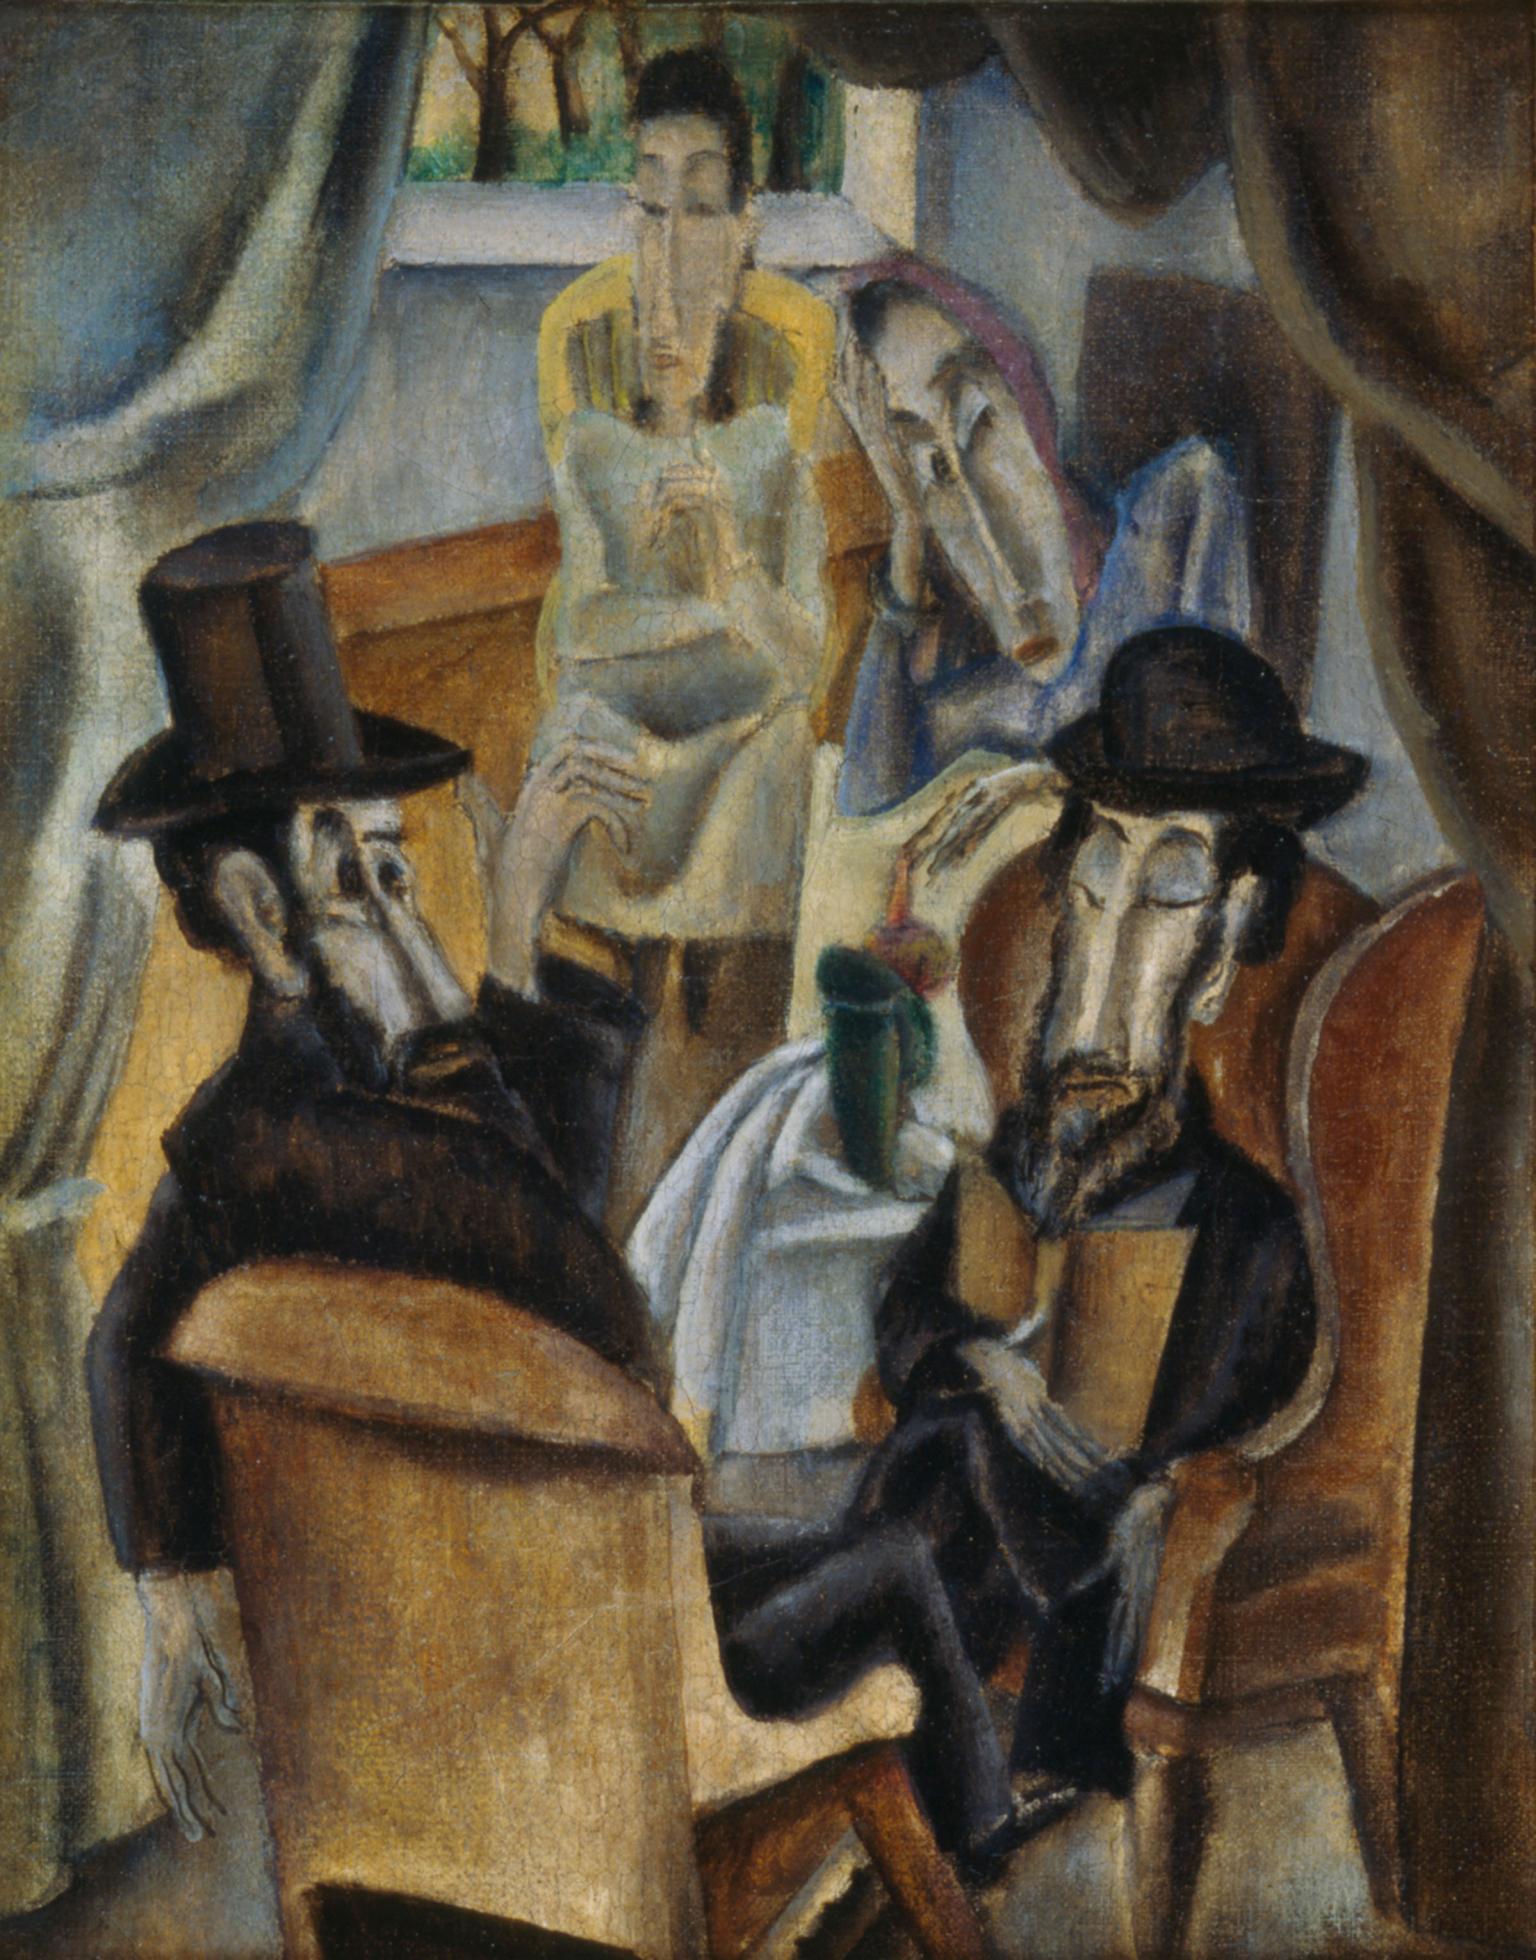 Painting of two male figures in hats sitting on chairs opposite one another in foreground and two women sitting in the background.